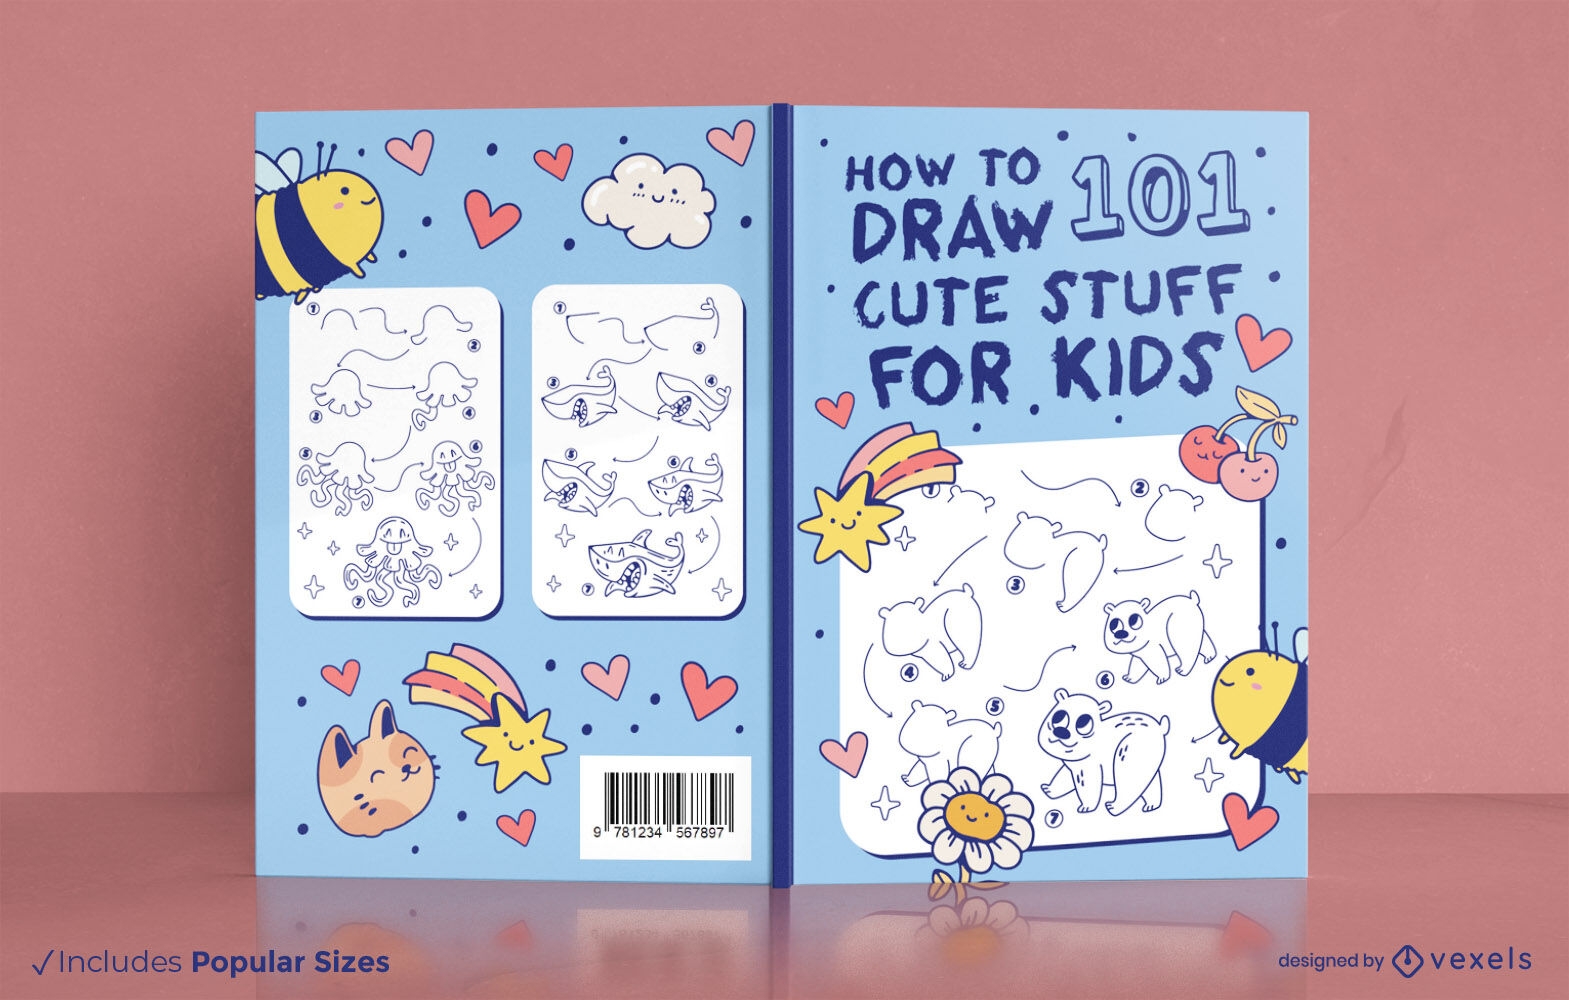 How to draw animals book cover design